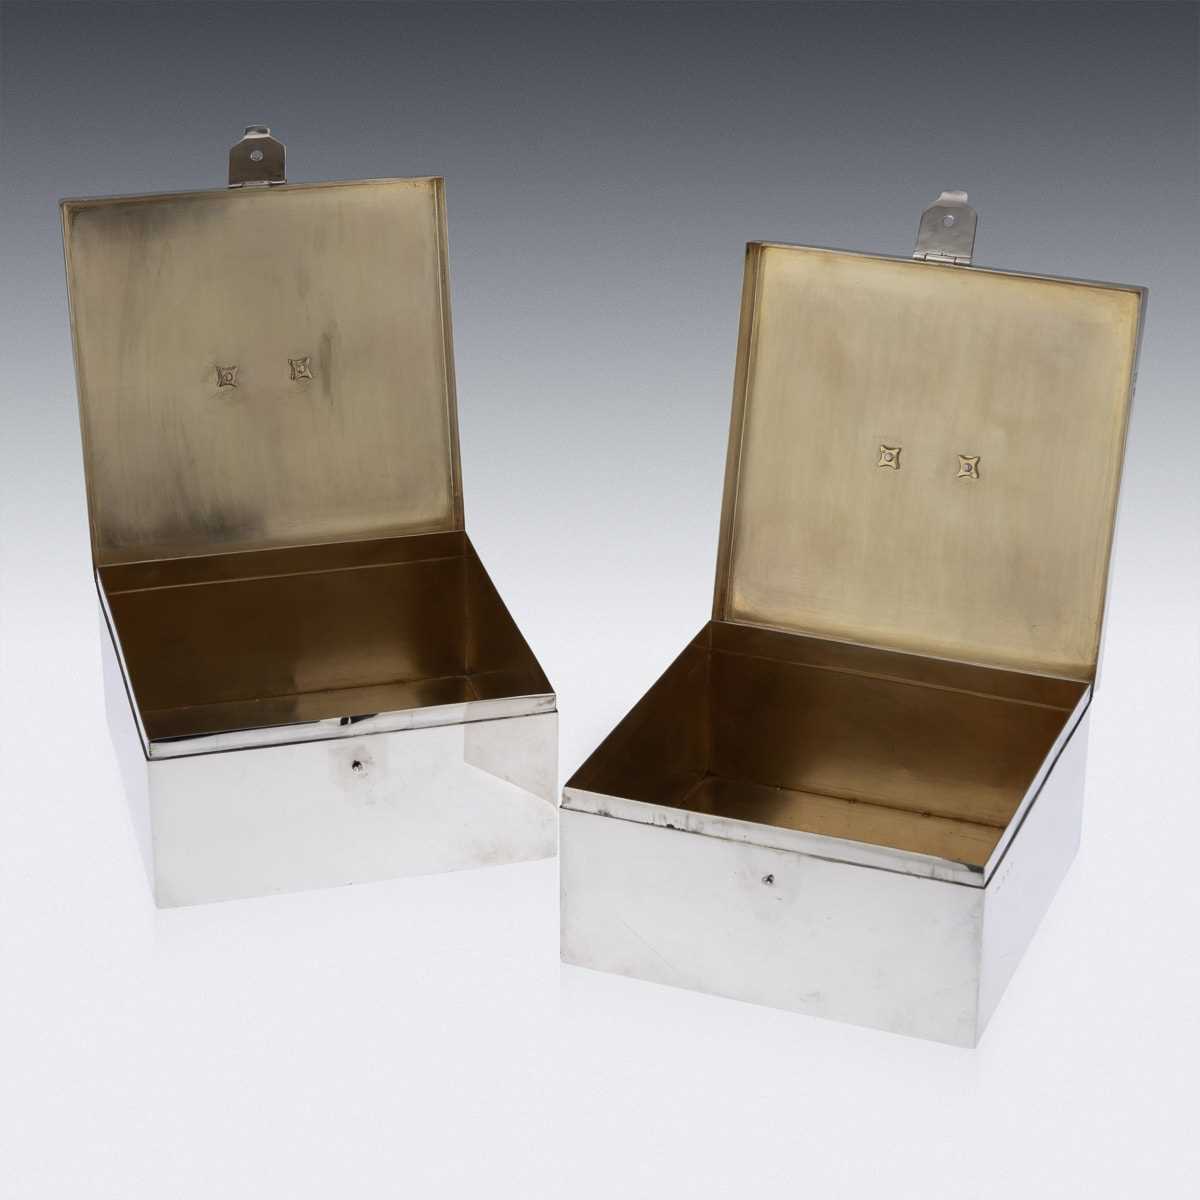 ASPREY & CO. : A PAIR OF STERLING SILVER ART DECO CIGAR BOXES, C. 1936 - Image 13 of 14